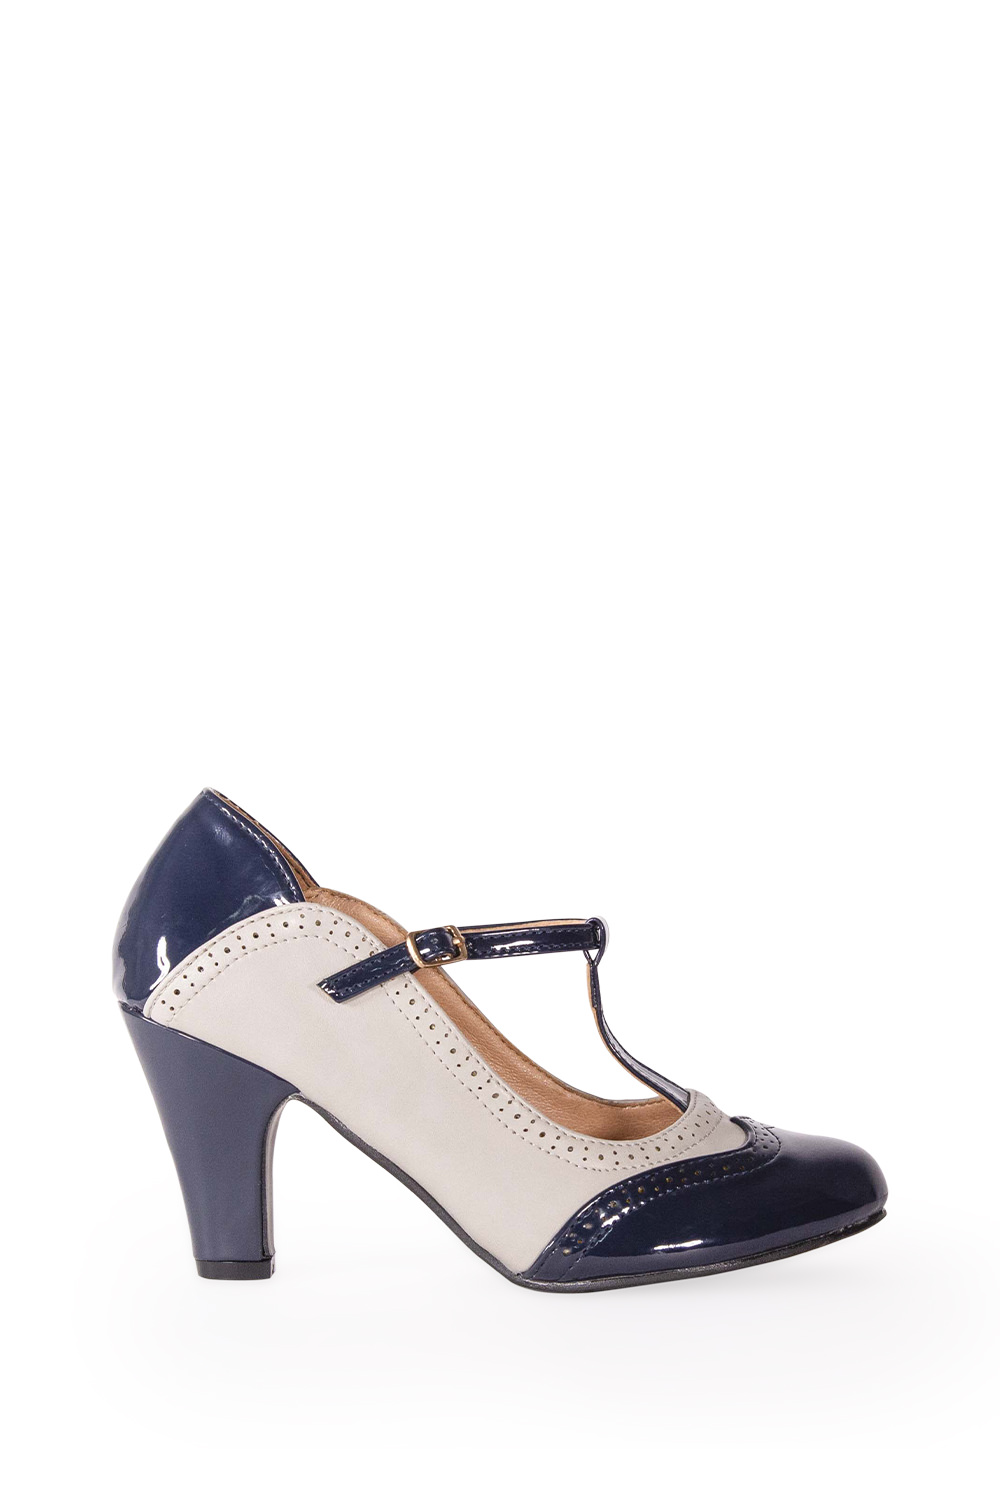 Banned Retro 50s Diva Blues T Strap Pumps In Navy And Grey